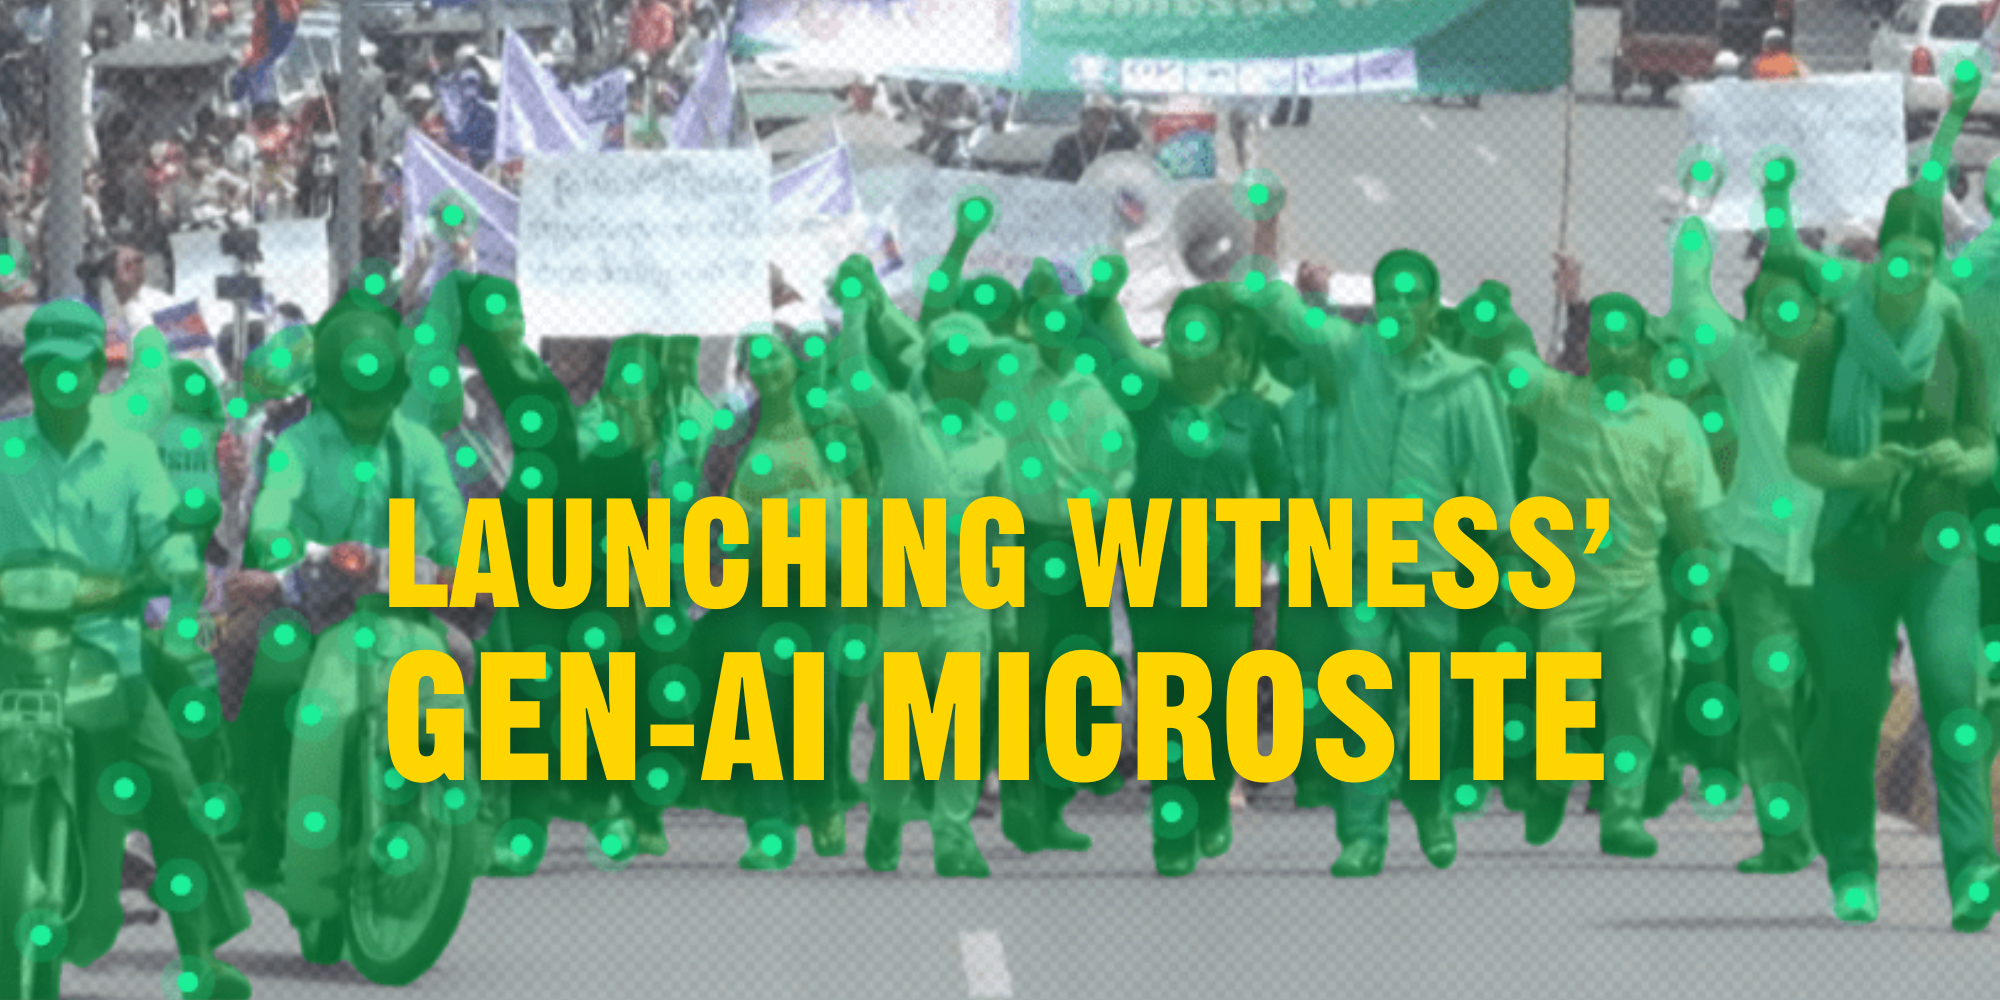 Image of a protest crowd on a street with a green digital overlay behind text which reads 'Launching WITNESS' gen-AI microsite' in yellow.